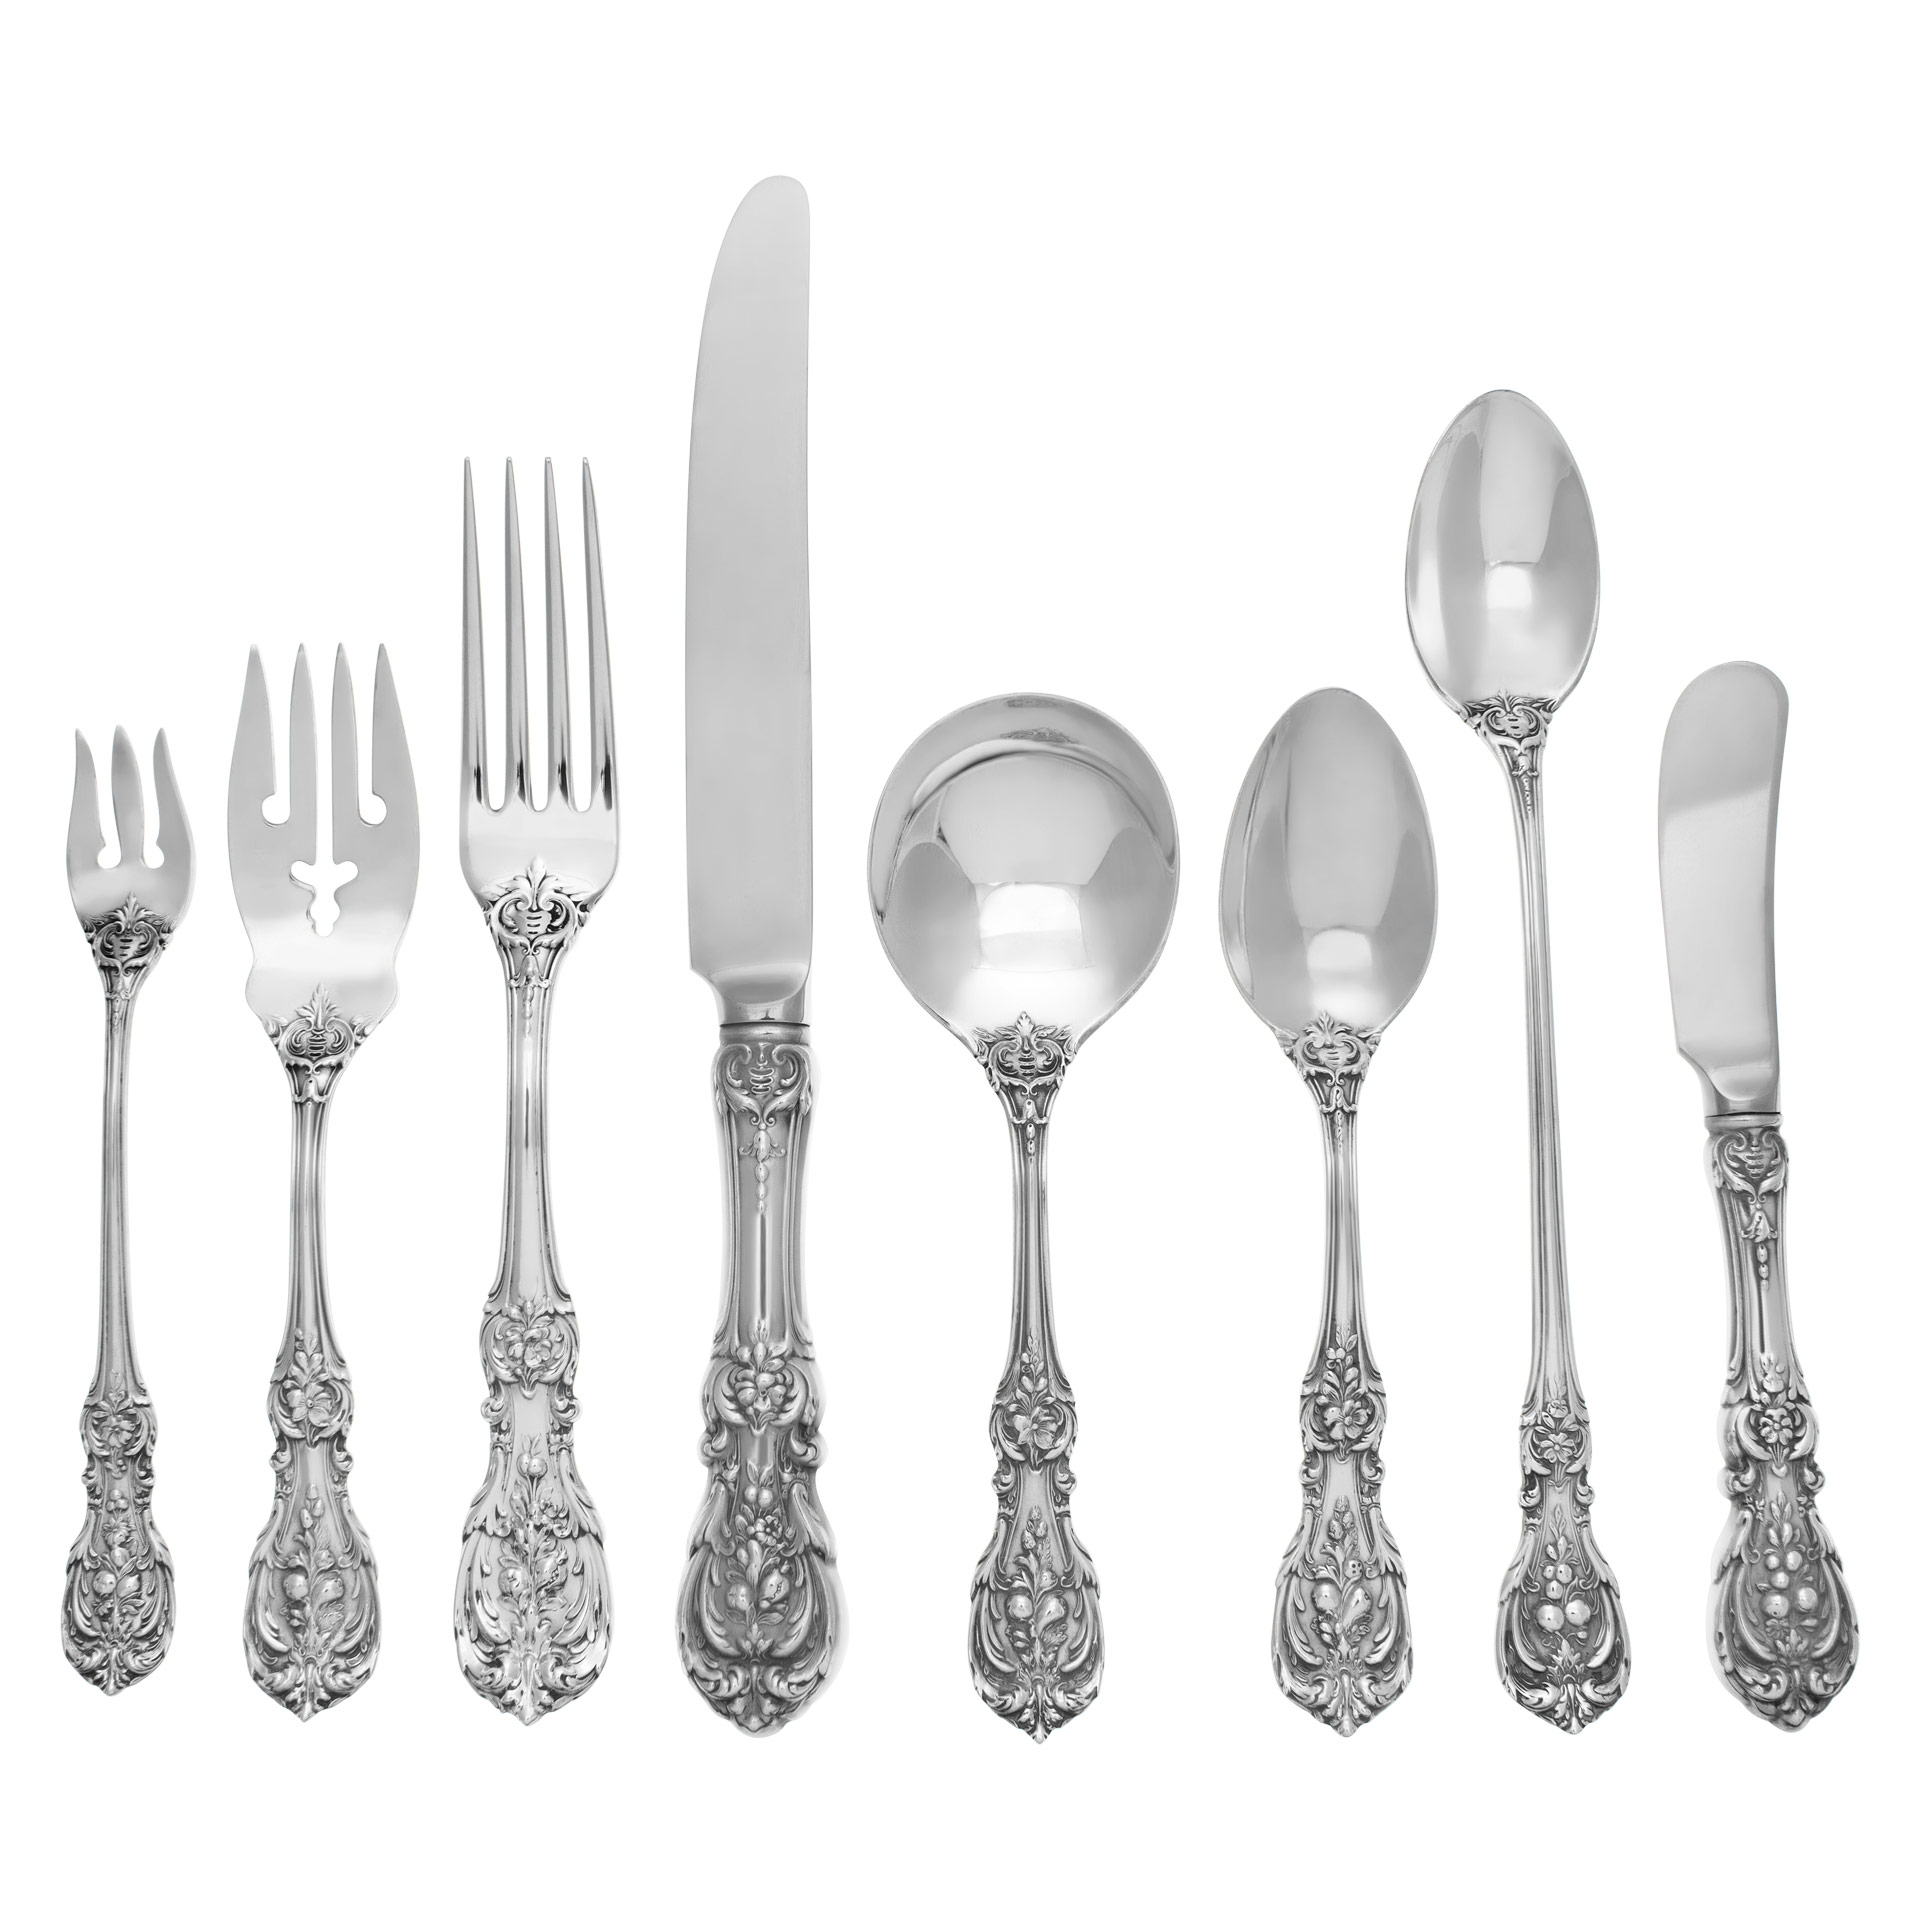 "FRANCIS THE FIRST" Sterling Silver Flatware set patented in 1907 by Reed & Barton- 5 places setting for 16 (with xtras) and 9 serving pieces. Over 6000 grams (193 troy ounces) sterling silver-.